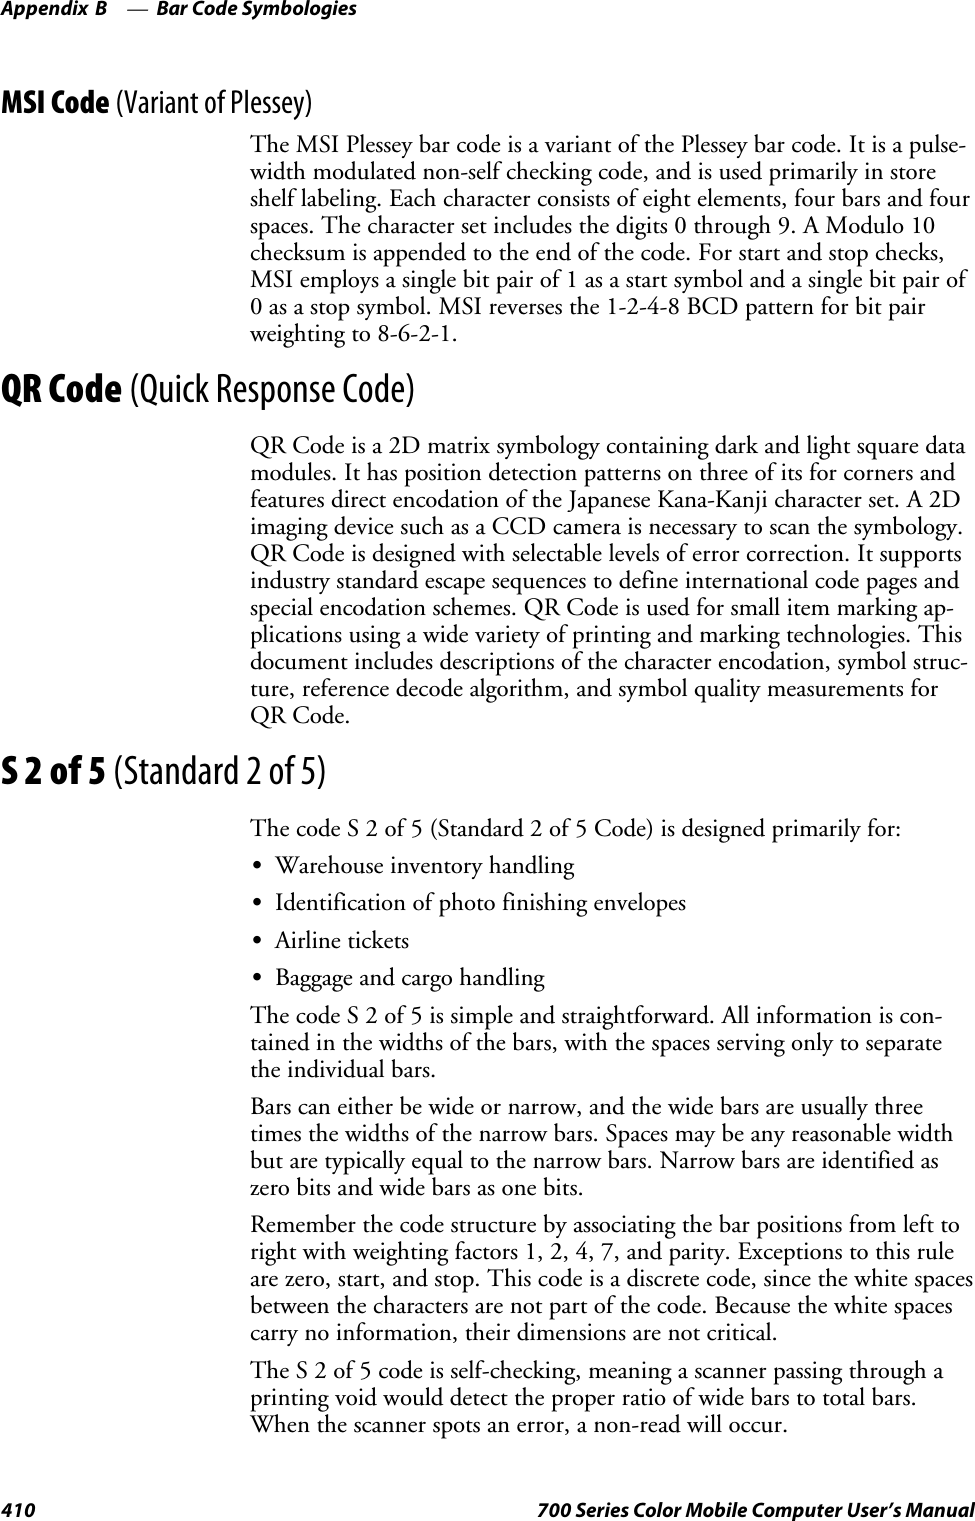 Bar Code SymbologiesAppendix —B410 700 Series Color Mobile Computer User’s ManualMSI Code (Variant of Plessey)The MSI Plessey bar code is a variant of the Plessey bar code. It is a pulse-width modulated non-self checking code, and is used primarily in storeshelf labeling. Each character consists of eight elements, four bars and fourspaces. The character set includes the digits 0 through 9. A Modulo 10checksum is appended to the end of the code. For start and stop checks,MSI employs a single bit pair of 1 as a start symbol and a single bit pair of0 as a stop symbol. MSI reverses the 1-2-4-8 BCD pattern for bit pairweighting to 8-6-2-1.QR Code (Quick Response Code)QR Code is a 2D matrix symbology containing dark and light square datamodules. It has position detection patterns on three of its for corners andfeatures direct encodation of the Japanese Kana-Kanji character set. A 2Dimaging device such as a CCD camera is necessary to scan the symbology.QR Code is designed with selectable levels of error correction. It supportsindustry standard escape sequences to define international code pages andspecial encodation schemes. QR Code is used for small item marking ap-plications using a wide variety of printing and marking technologies. Thisdocument includes descriptions of the character encodation, symbol struc-ture, reference decode algorithm, and symbol quality measurements forQR Code.S2of5(Standard 2 of 5)The code S 2 of 5 (Standard 2 of 5 Code) is designed primarily for:SWarehouse inventory handlingSIdentification of photo finishing envelopesSAirline ticketsSBaggage and cargo handlingThe code S 2 of 5 is simple and straightforward. All information is con-tained in the widths of the bars, with the spaces serving only to separatethe individual bars.Bars can either be wide or narrow, and the wide bars are usually threetimes the widths of the narrow bars. Spaces may be any reasonable widthbut are typically equal to the narrow bars. Narrow bars are identified aszero bits and wide bars as one bits.Remember the code structure by associating the bar positions from left torightwithweightingfactors1,2,4,7,andparity.Exceptionstothisruleare zero, start, and stop. This code is a discrete code, since the white spacesbetween the characters are not part of the code. Because the white spacescarry no information, their dimensions are not critical.The S 2 of 5 code is self-checking, meaning a scanner passing through aprinting void would detect the proper ratio of wide bars to total bars.When the scanner spots an error, a non-read will occur.